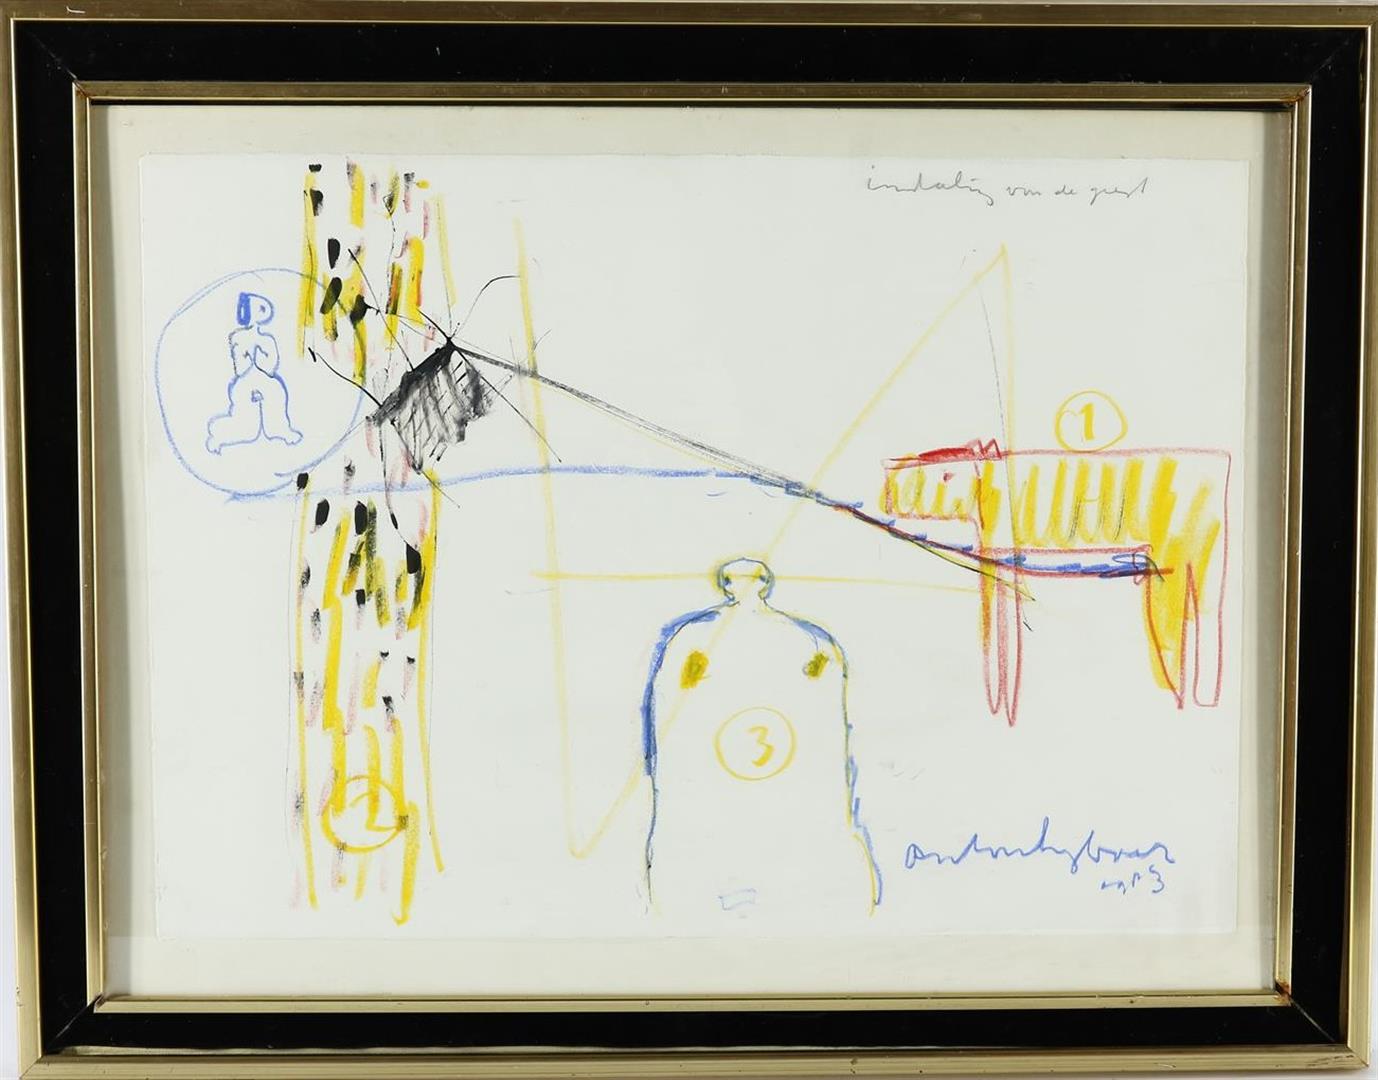 Anton Heyboer (1924-2005) 'Descent of the spirit', signed lower right and dated 1983, mixed media on - Image 2 of 5